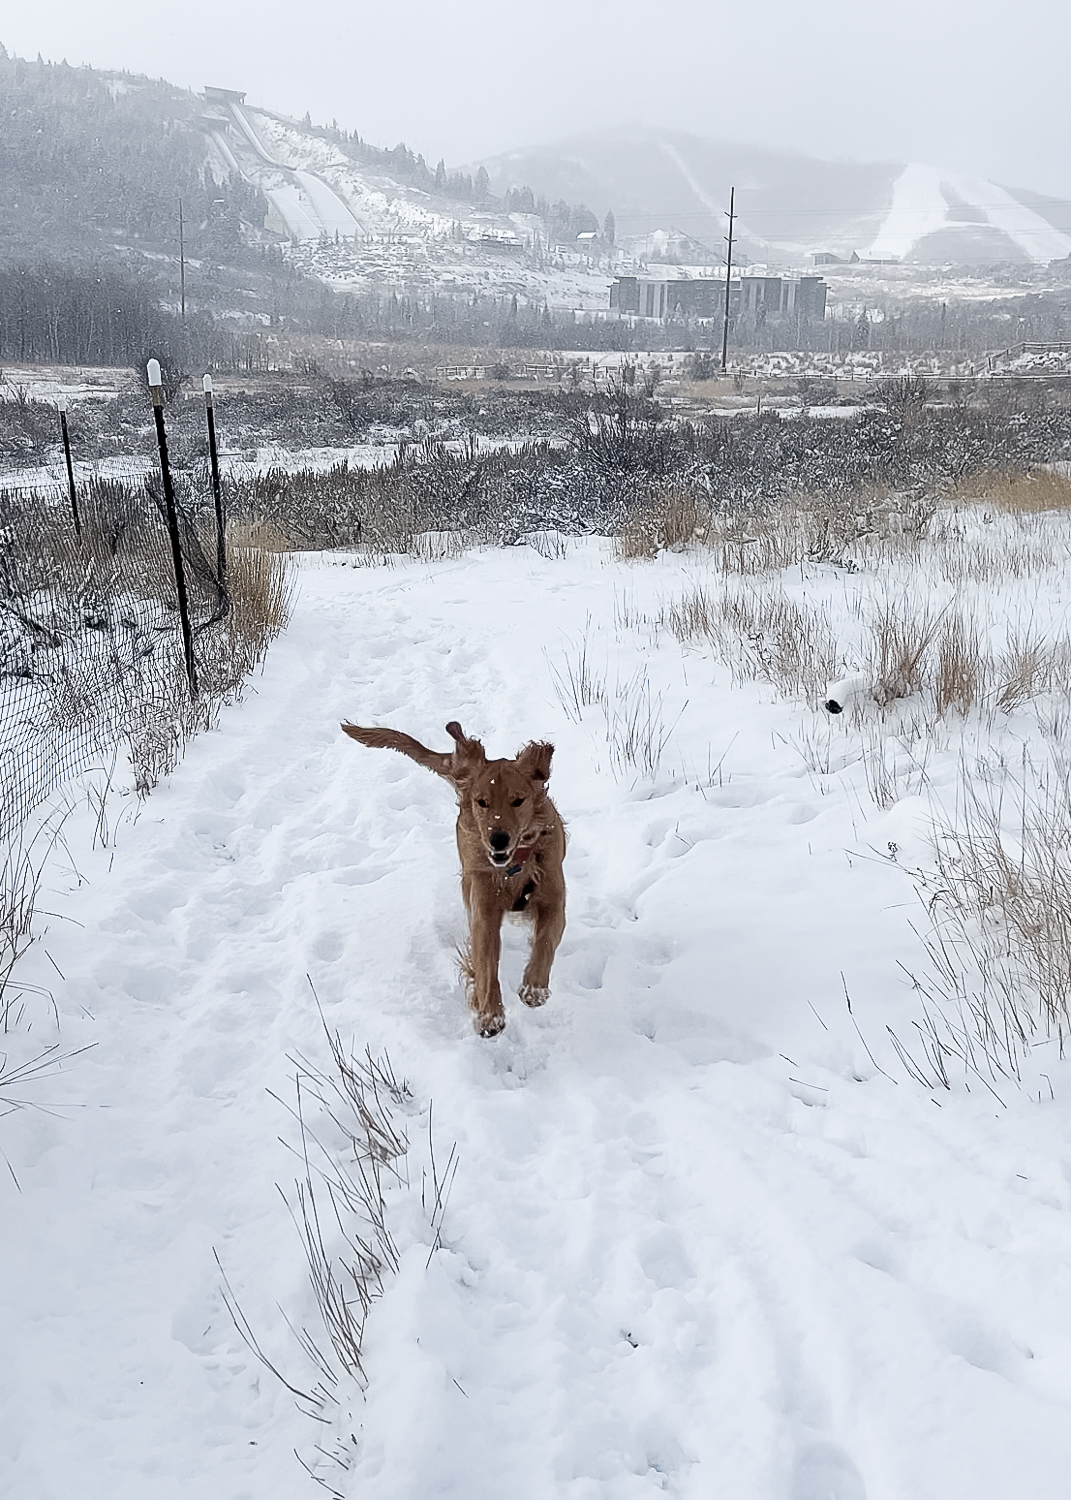 Pacific Globetrotters, budget family travel blog, shares 5 Days in Park City In The Winter With A Dog. Downtown Park City